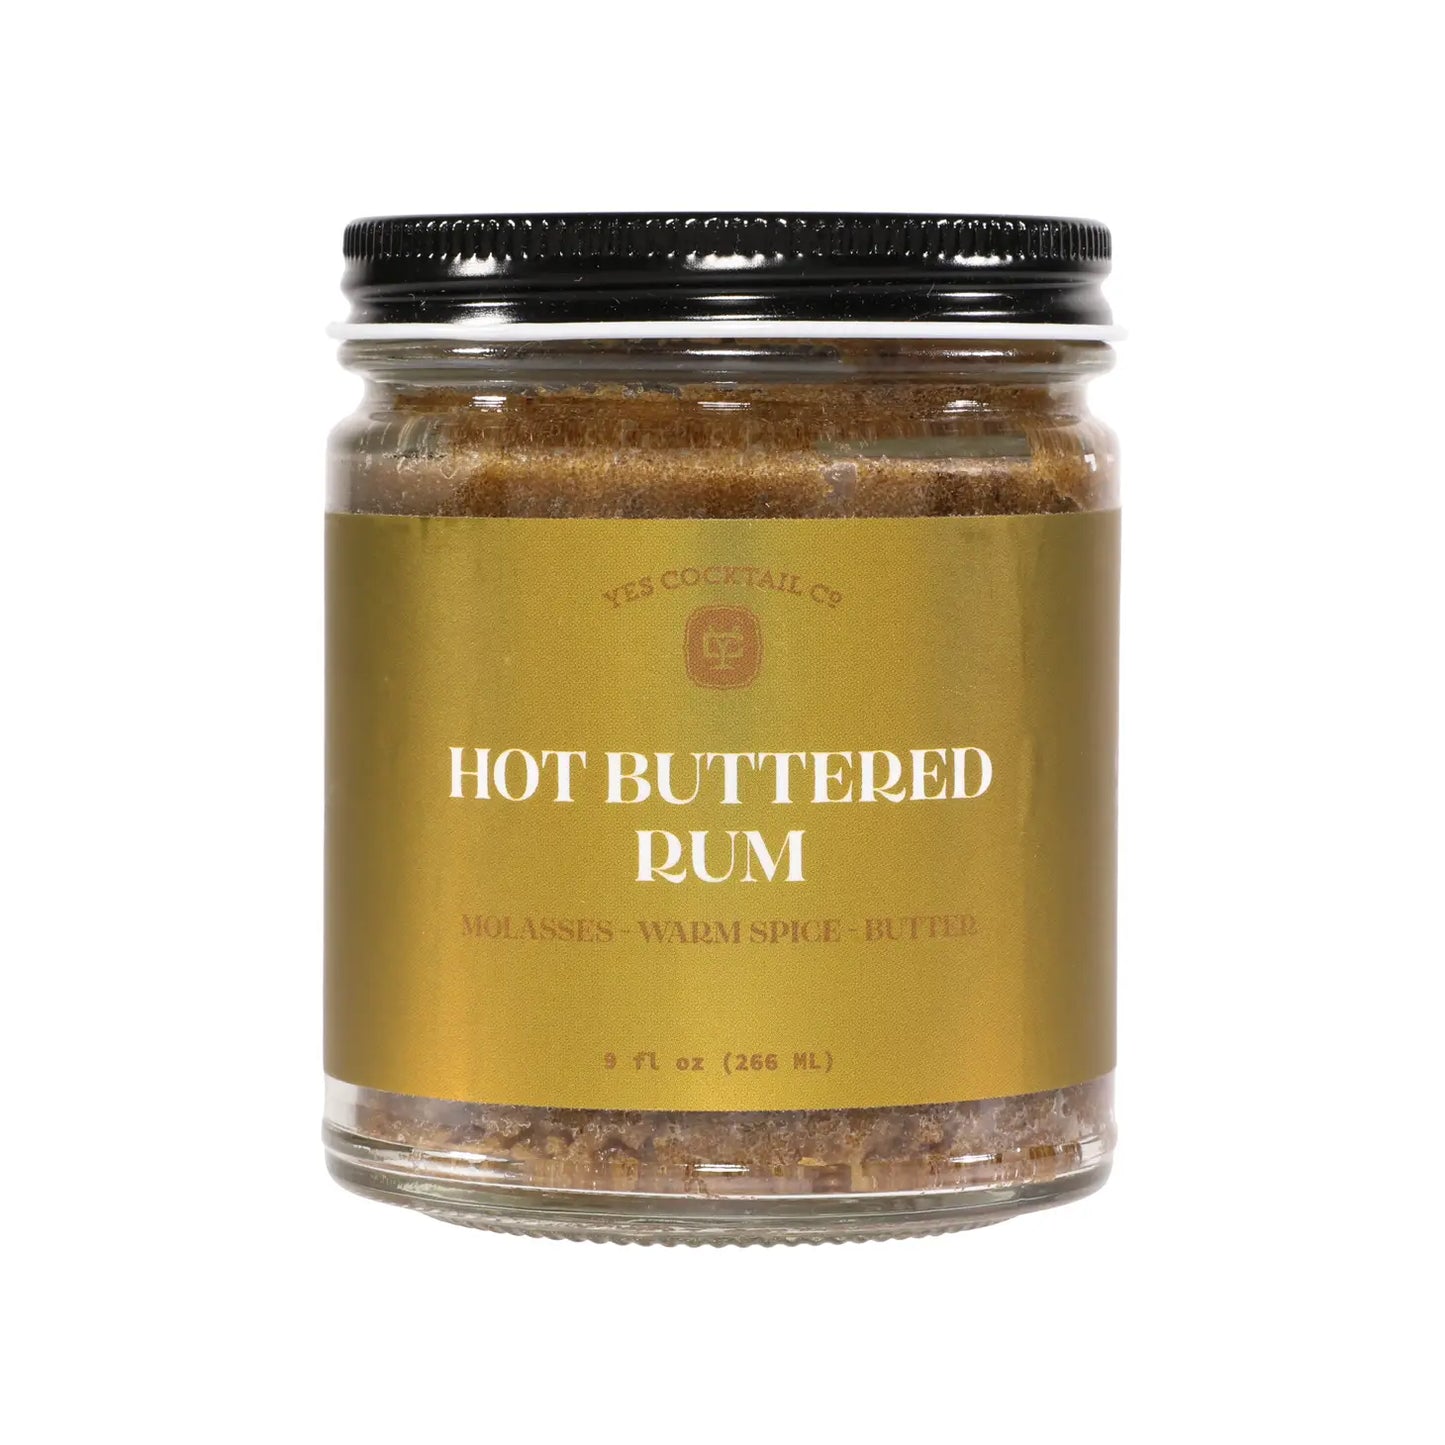 Hot Buttered Rum - all natural